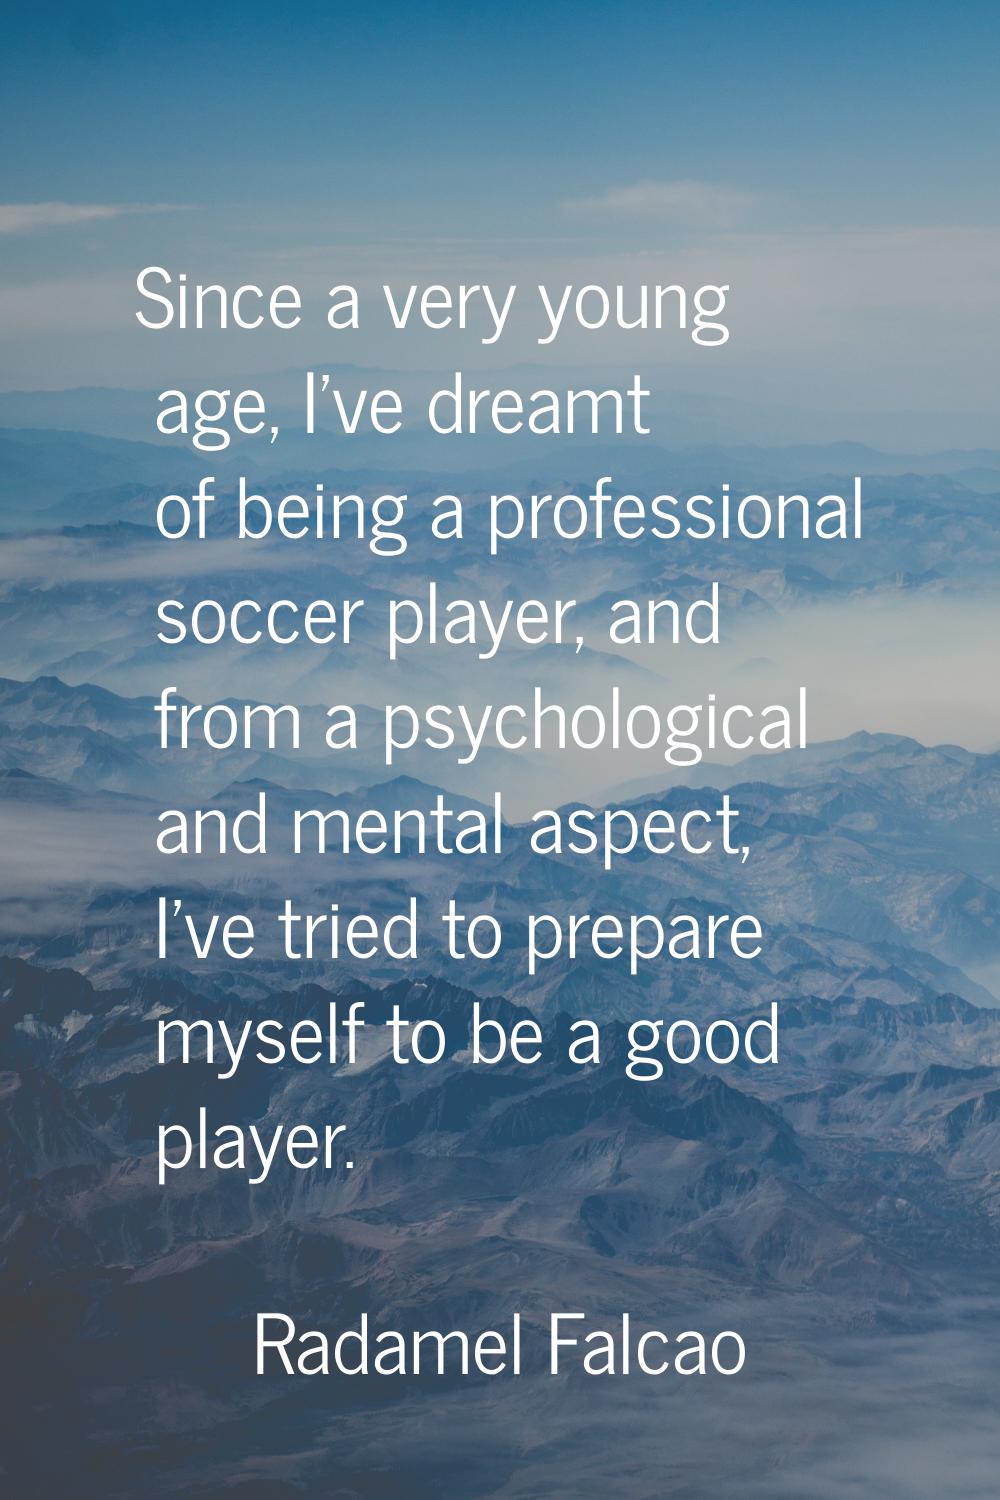 Since a very young age, I've dreamt of being a professional soccer player, and from a psychological